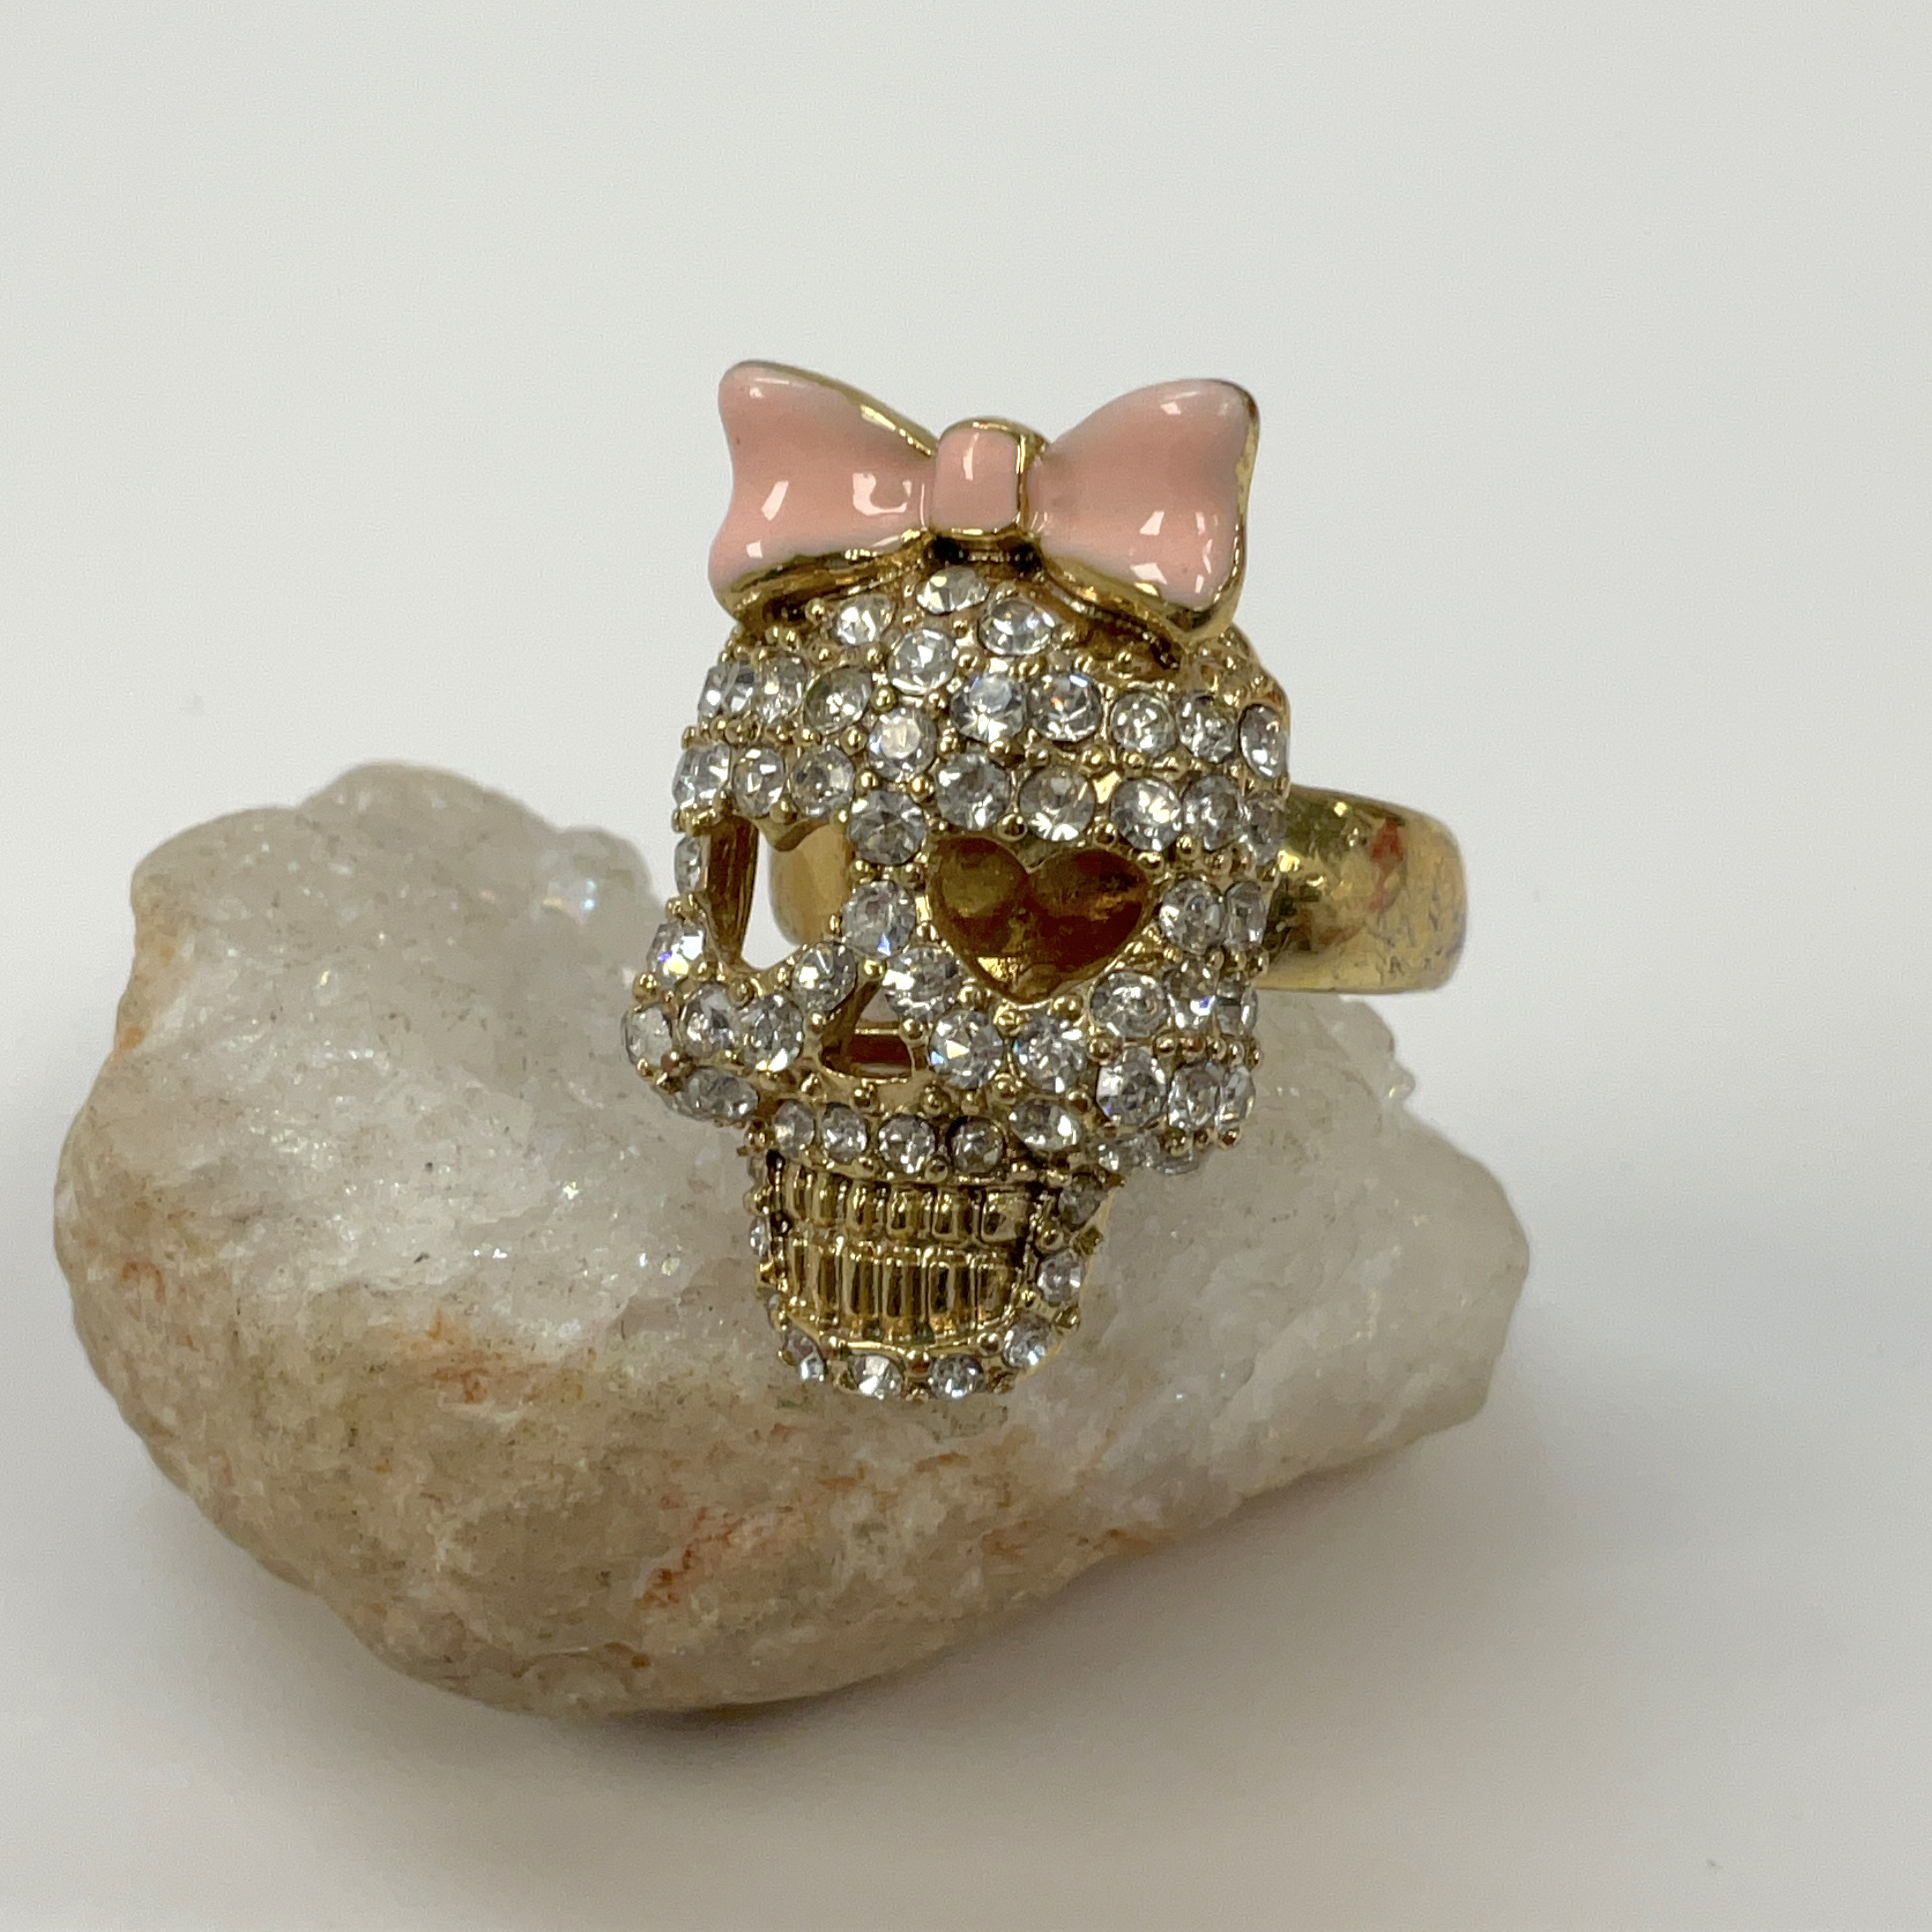 New BETSEY JOHNSON SKULL AND FLOWERS leather cuff BRACELET